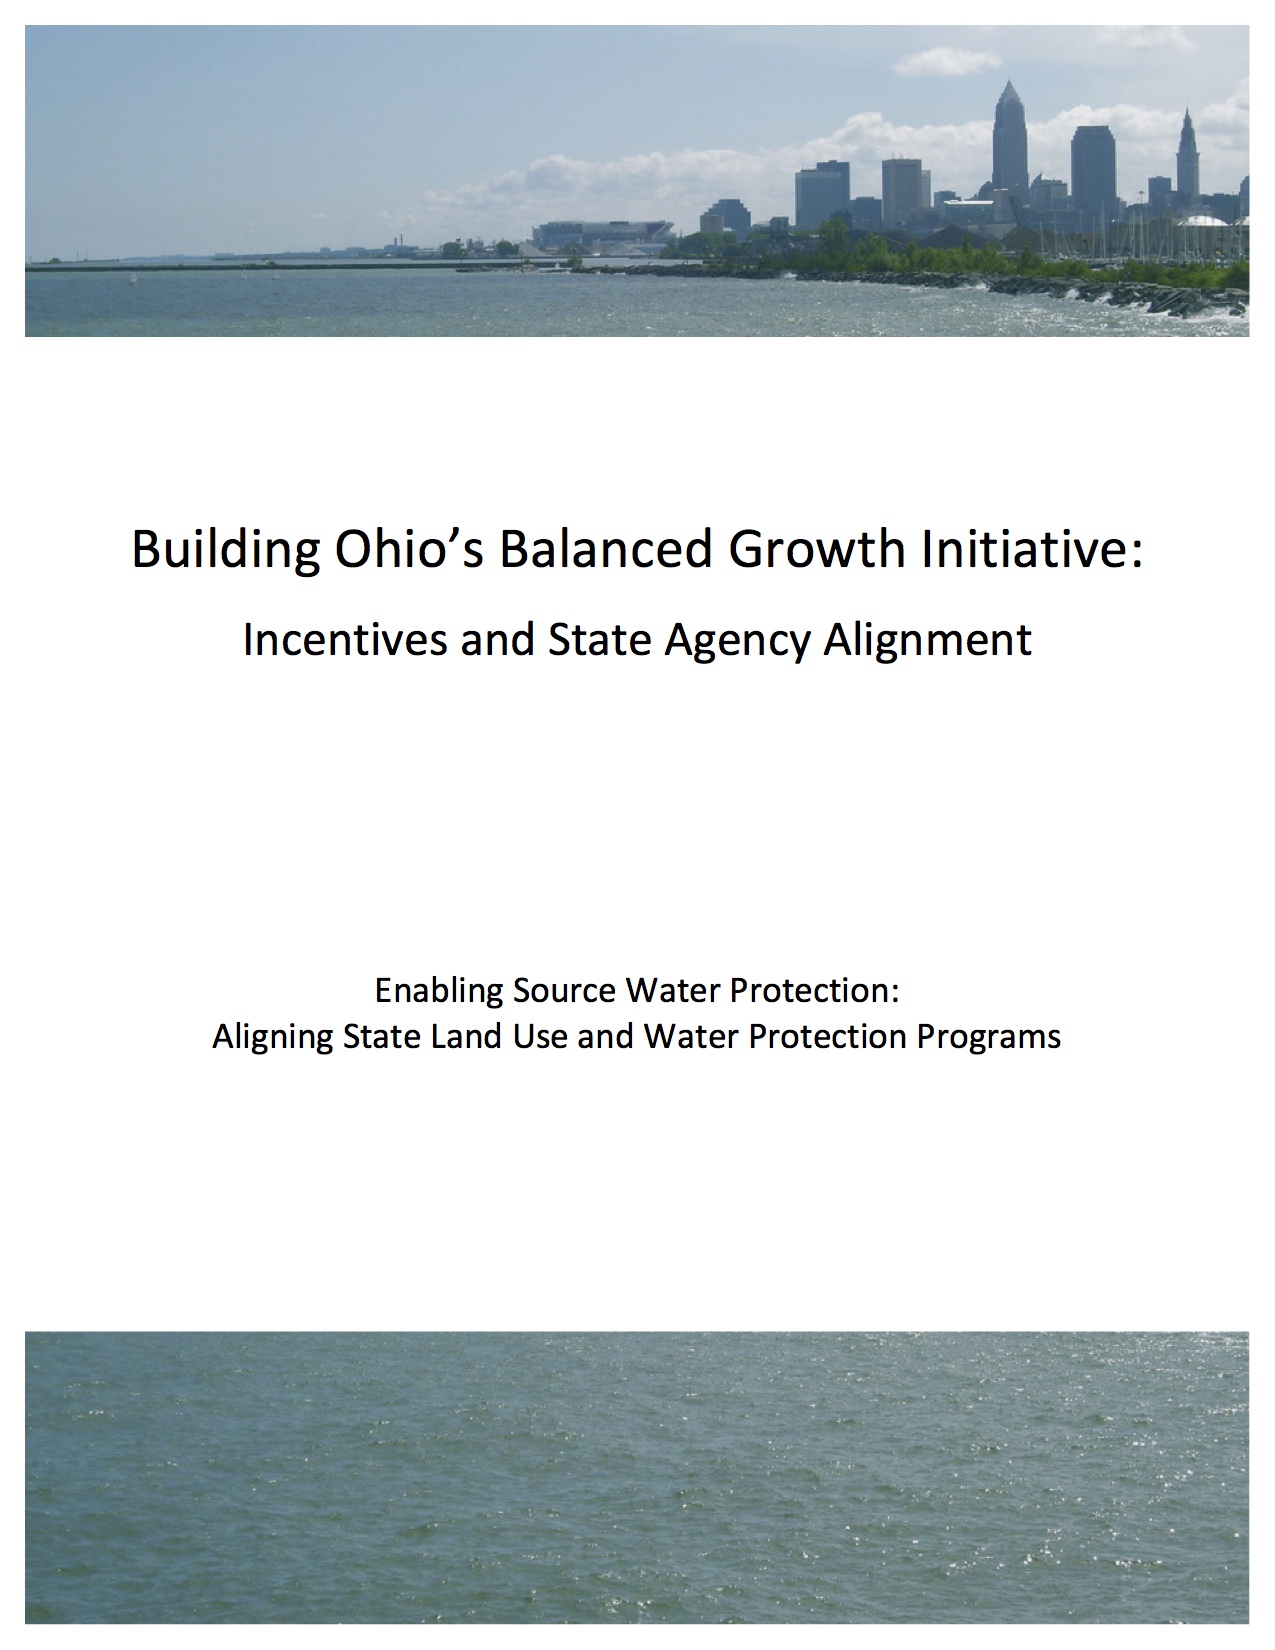 Building Ohio’s Balanced Growth Initiative: Incentives and State Agency Alignment